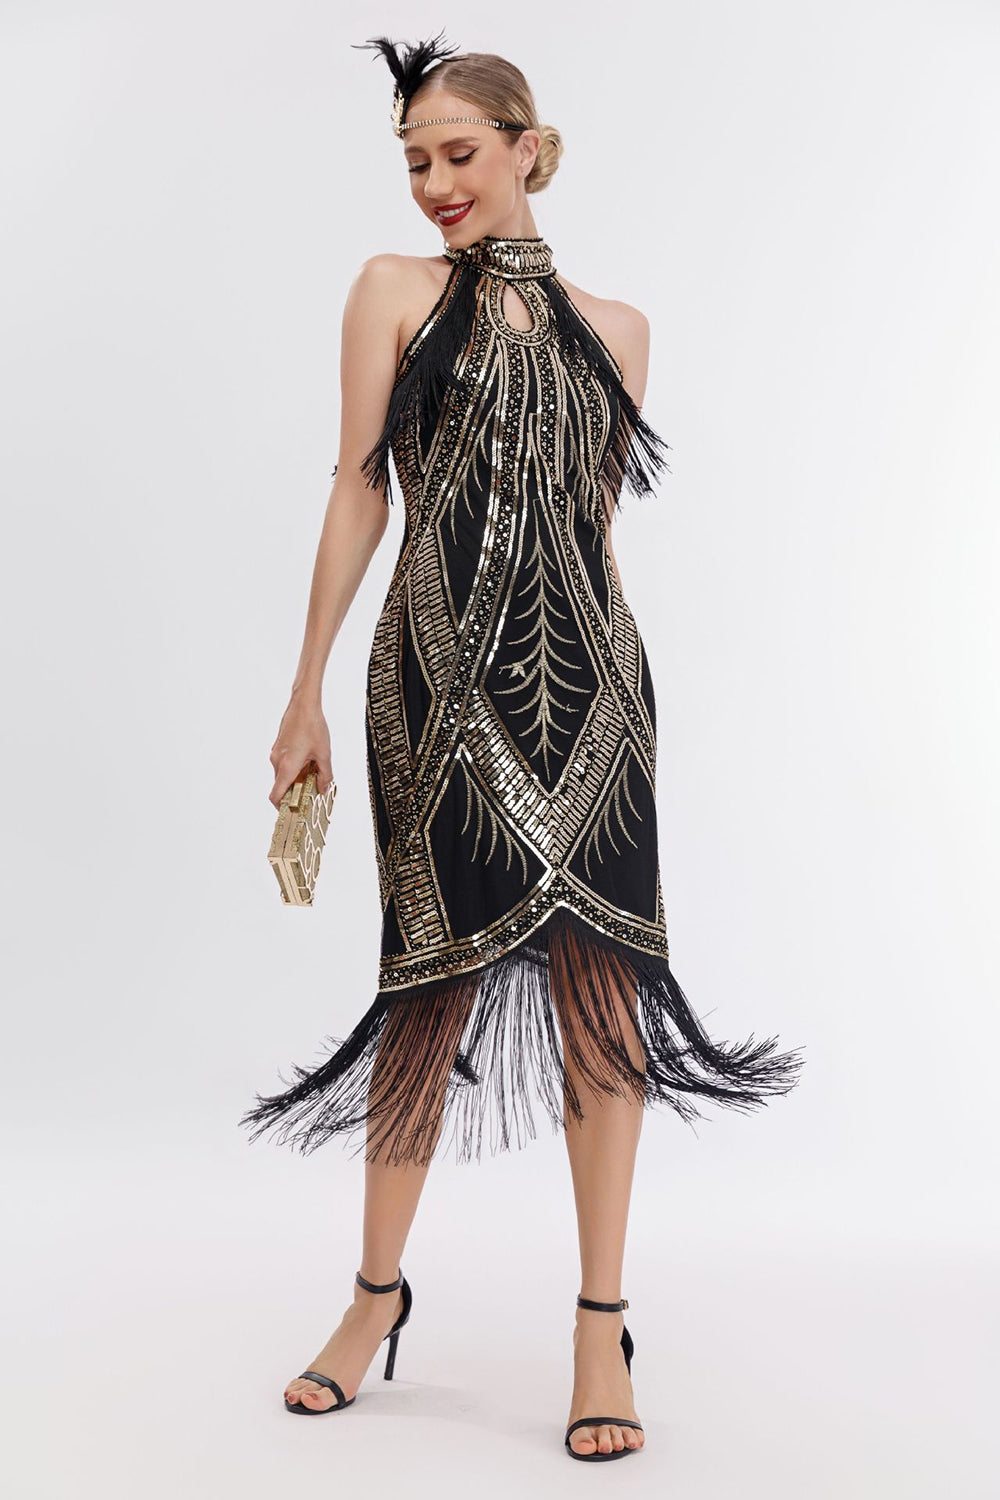 Sparkly Black Golden Sequins Fringed Dress with Accessories Set